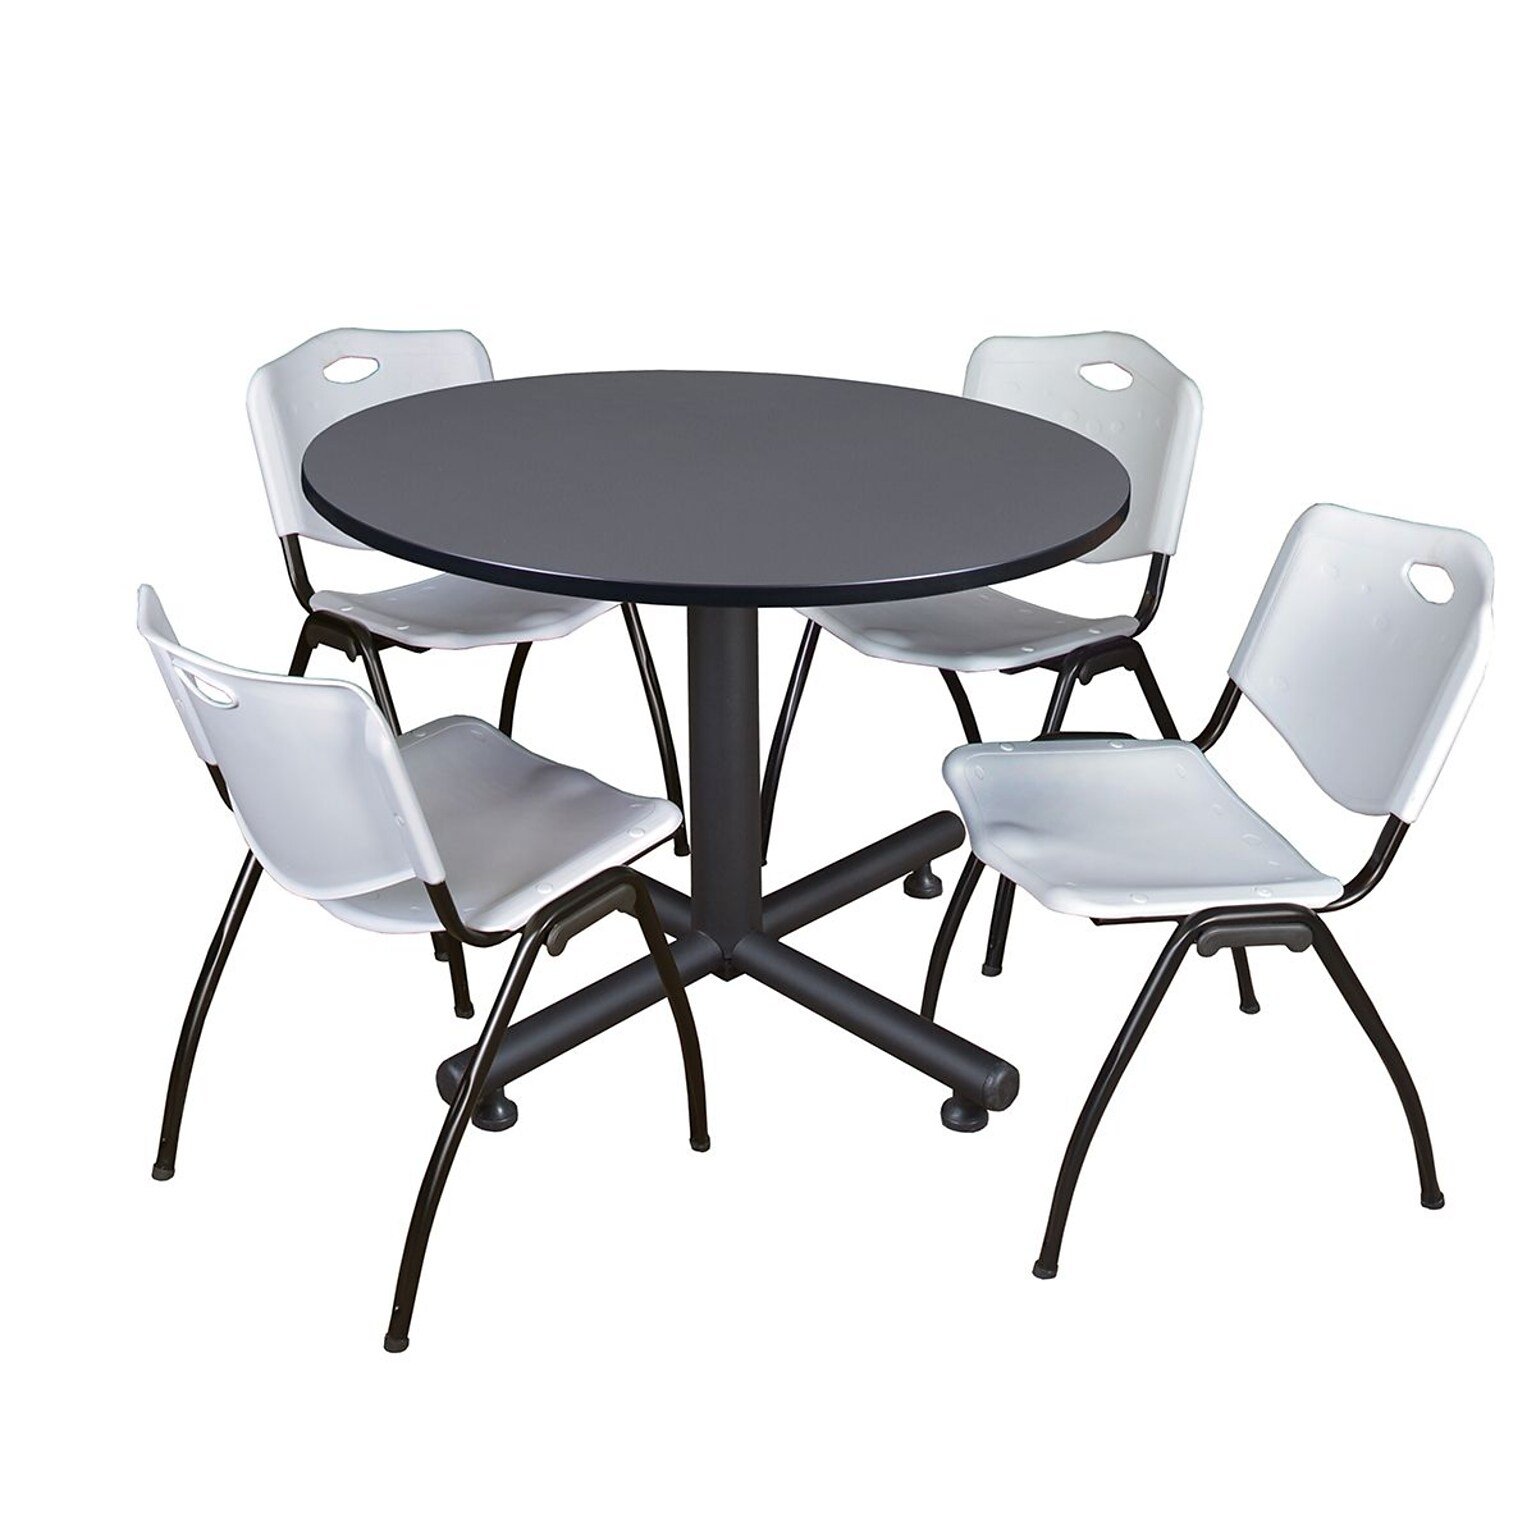 Regency 48-inch Round Gray Table with M Stacker Chairs, Gray (TKB48RNDGY47GY)